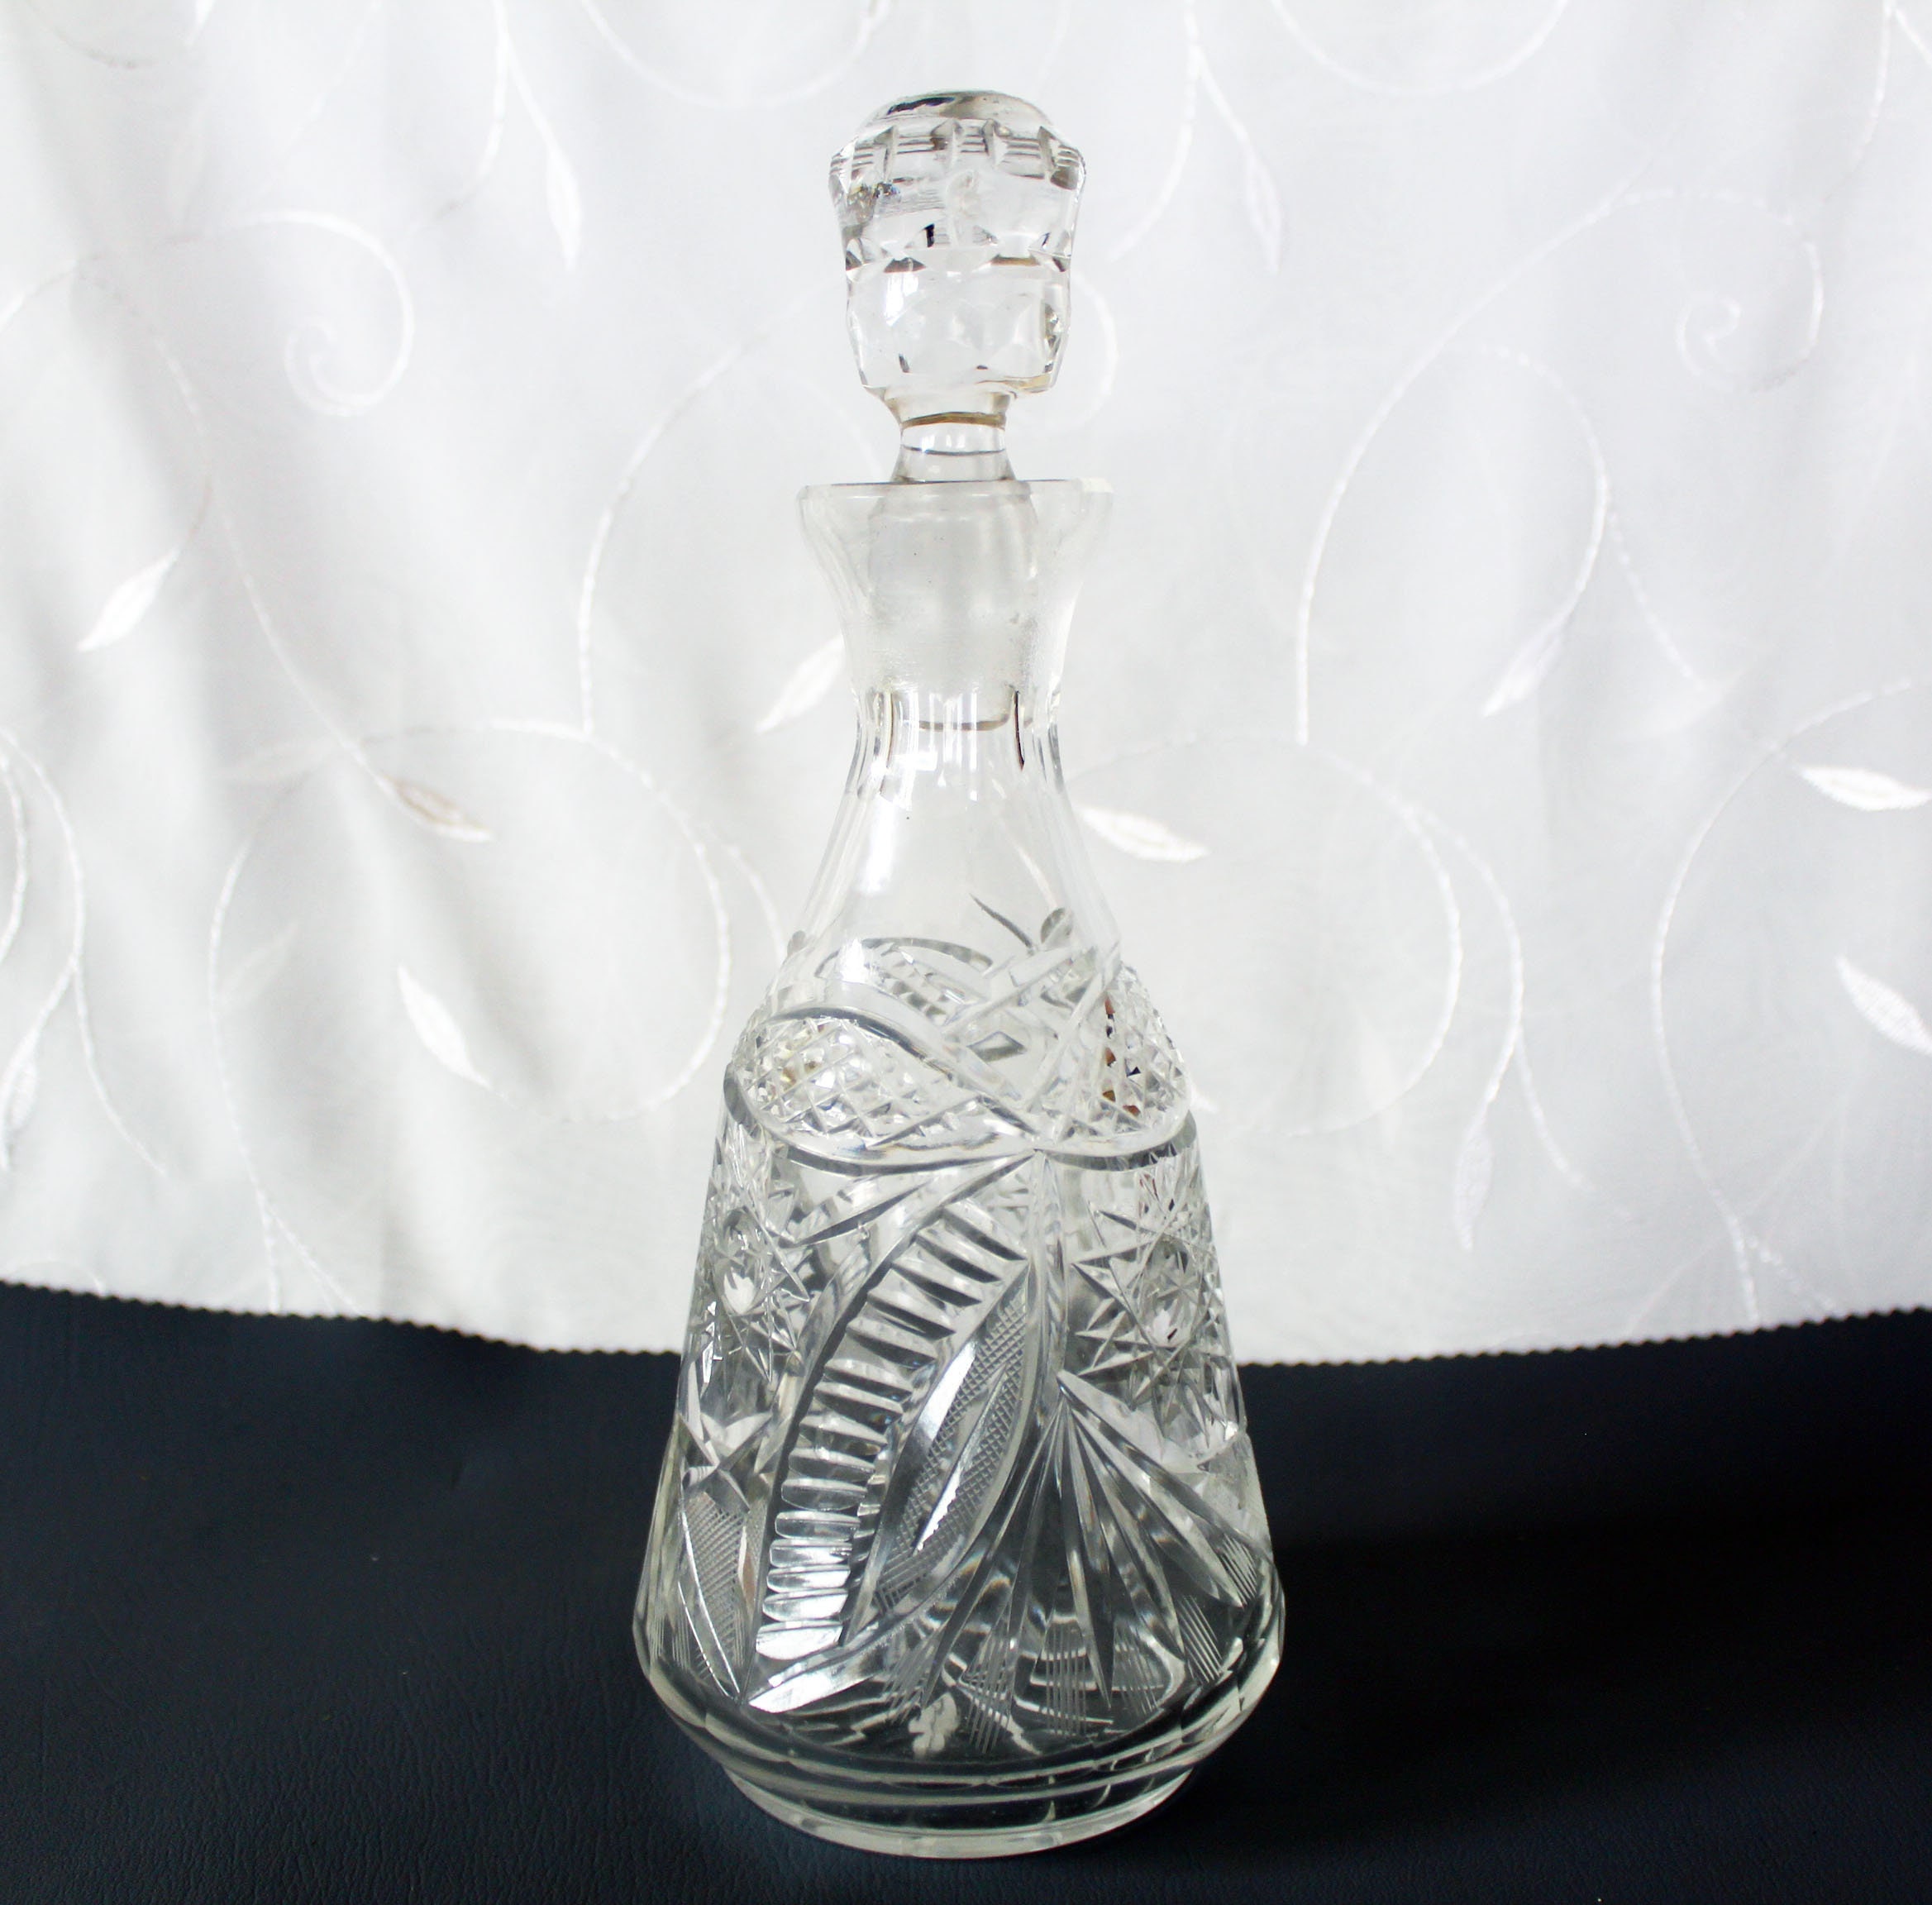 Antique Cut Glass Decanter Crystal Decanter French Decanter - Etsy